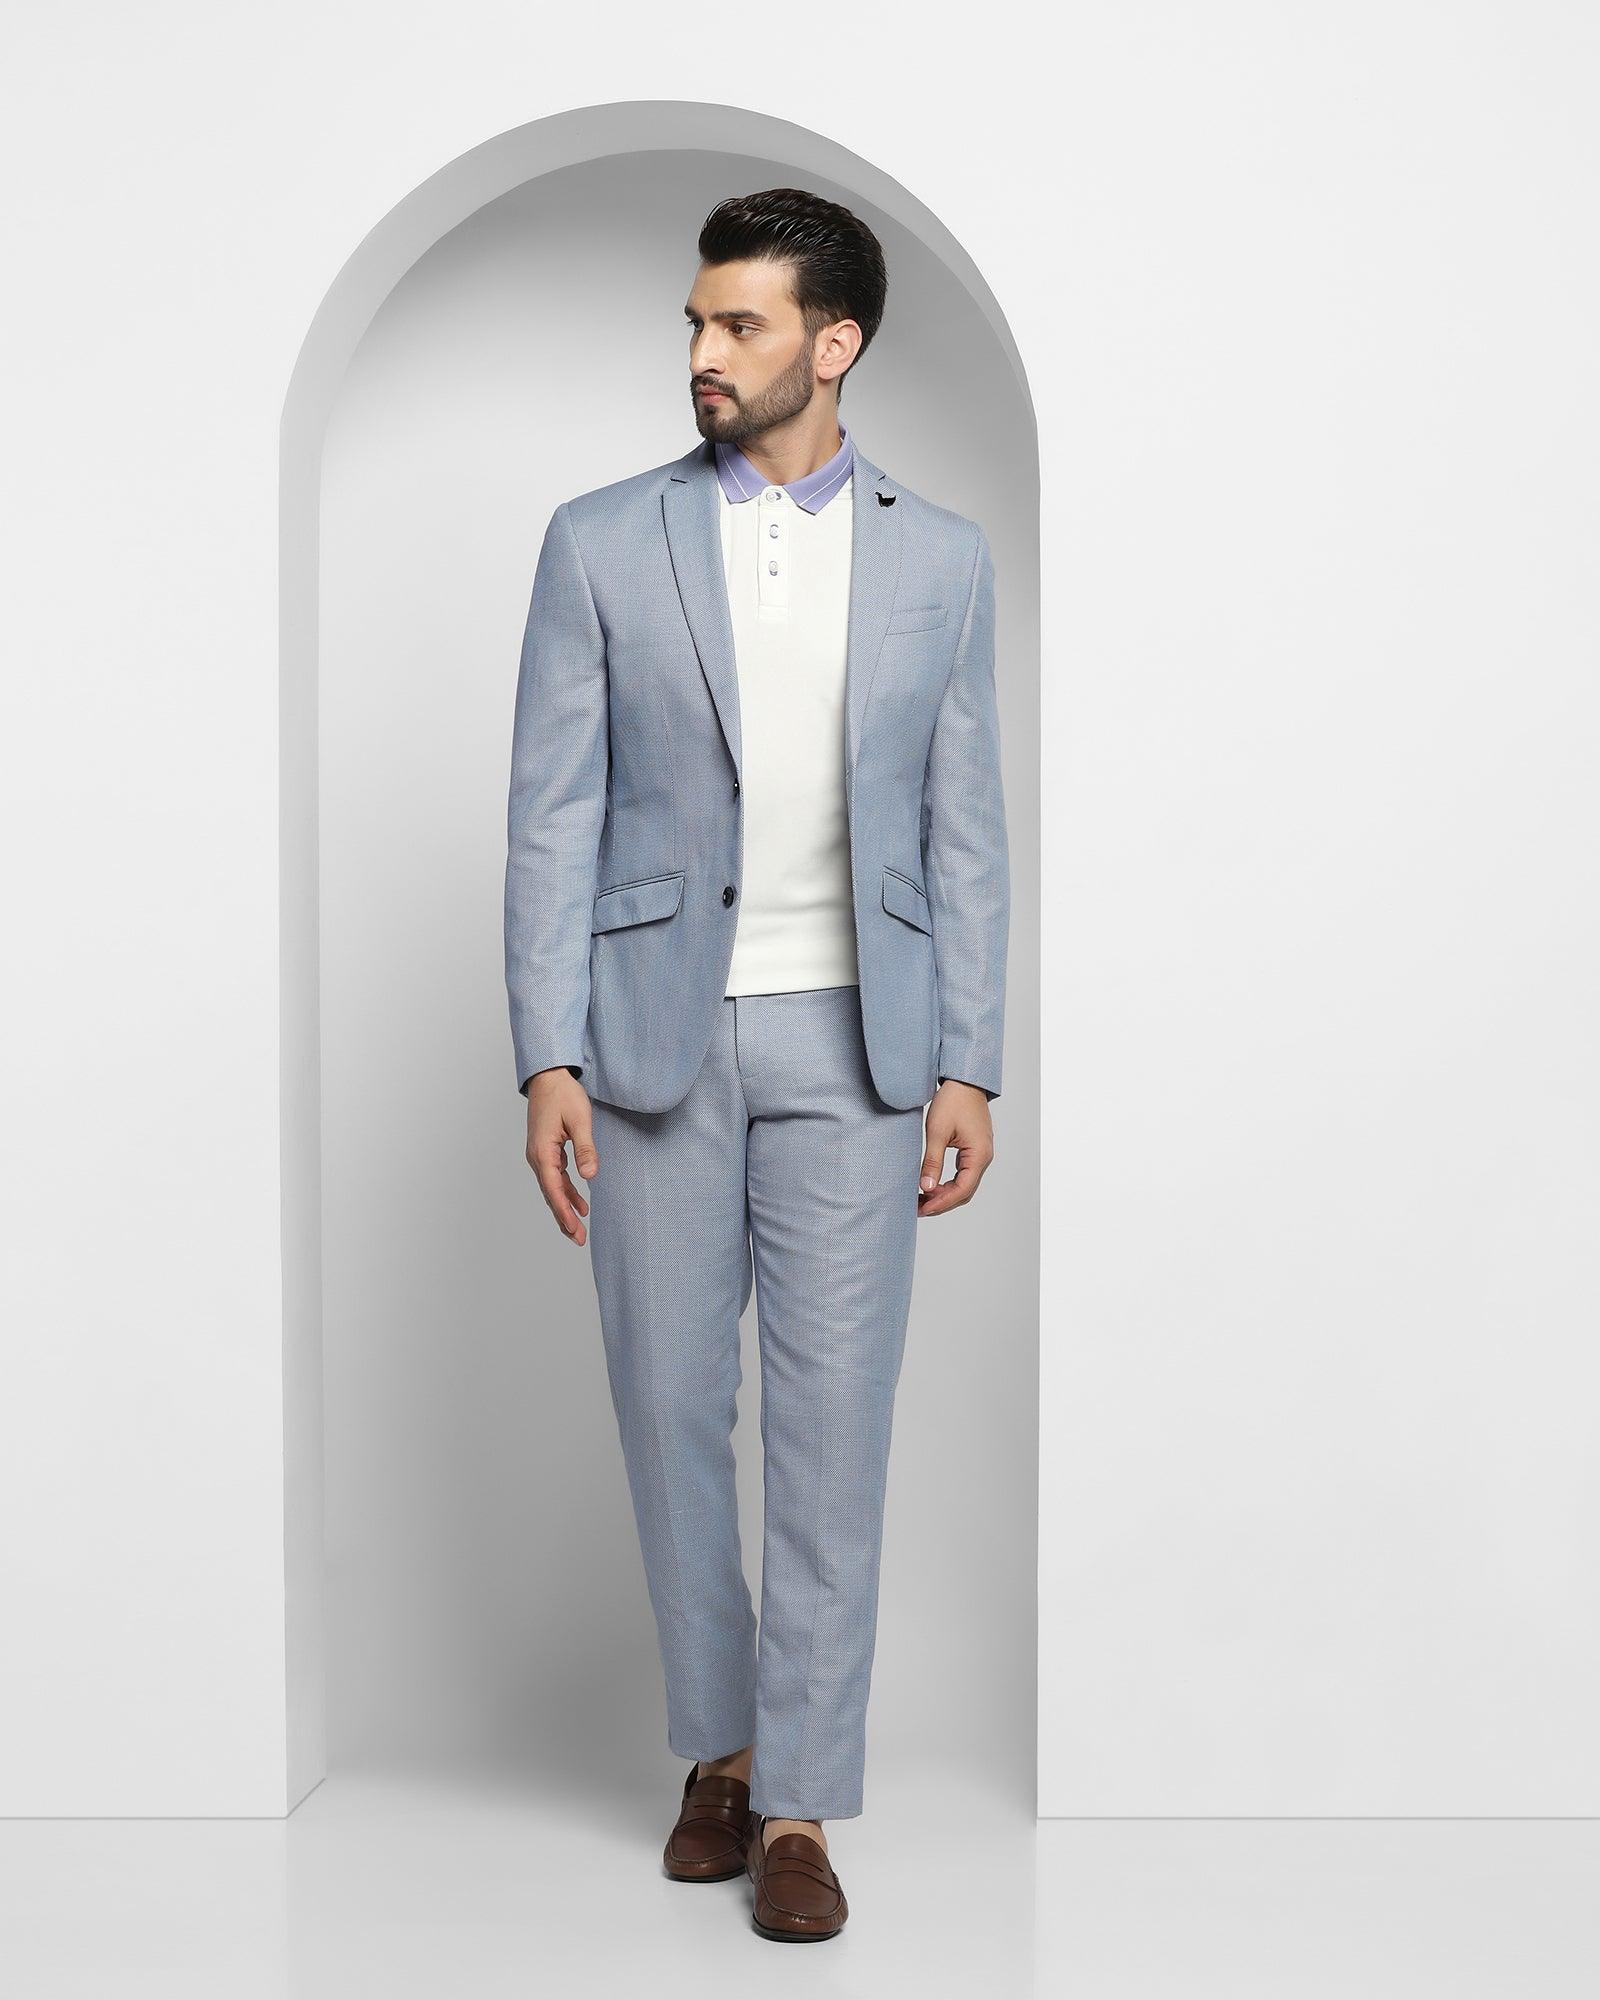 Arrow Suits in Hyderabad - Dealers, Manufacturers & Suppliers - Justdial